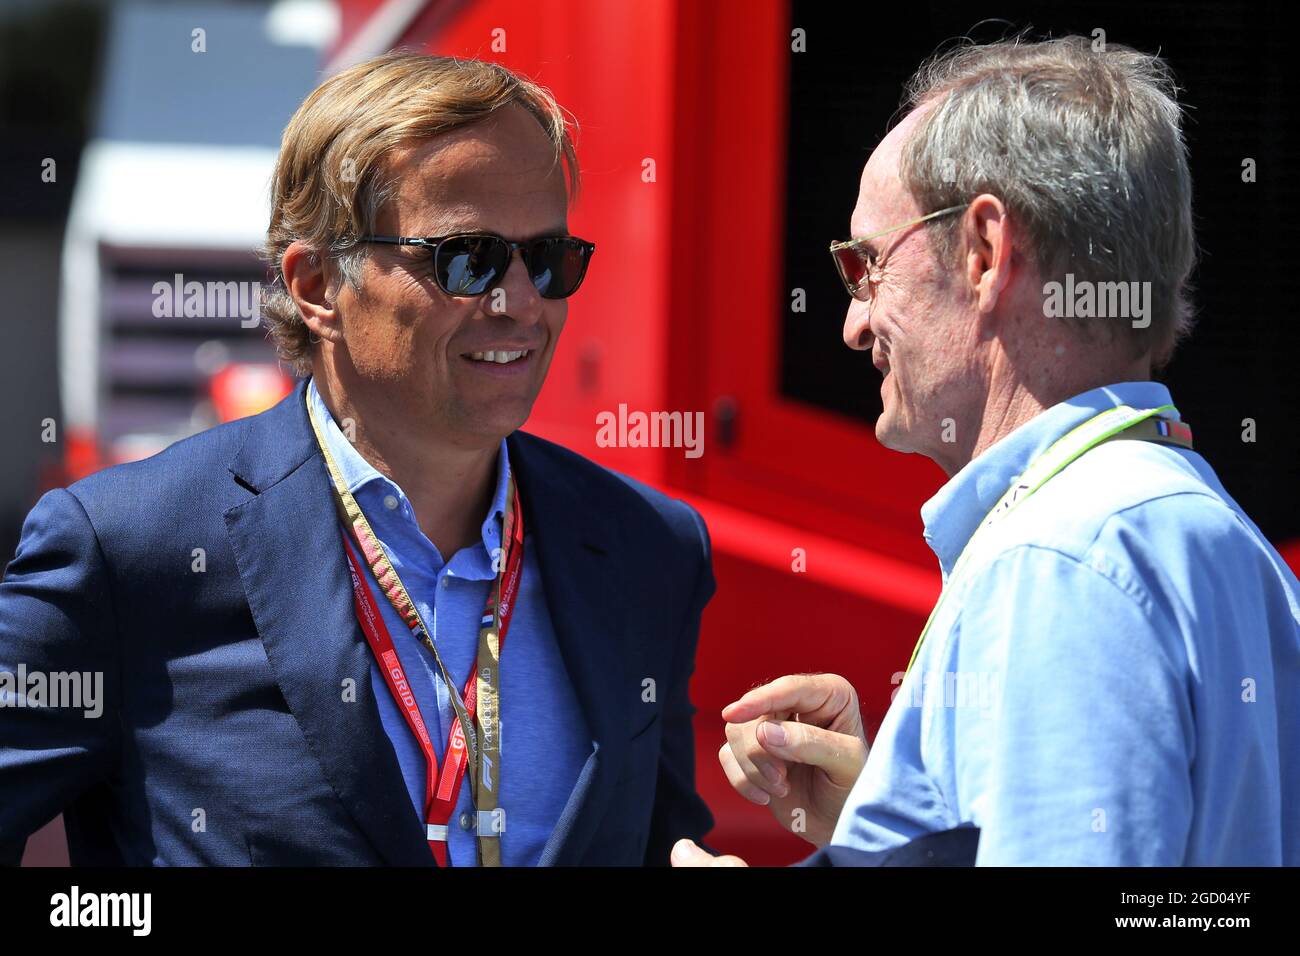 On foot Marxism Andes L to R): Jean-Frederic Dufour, Rolex CEO with Jean-Claude Killy (FRA)  Former Ski Racer. French Grand Prix, Sunday 23rd June 2019. Paul Ricard,  France Stock Photo - Alamy